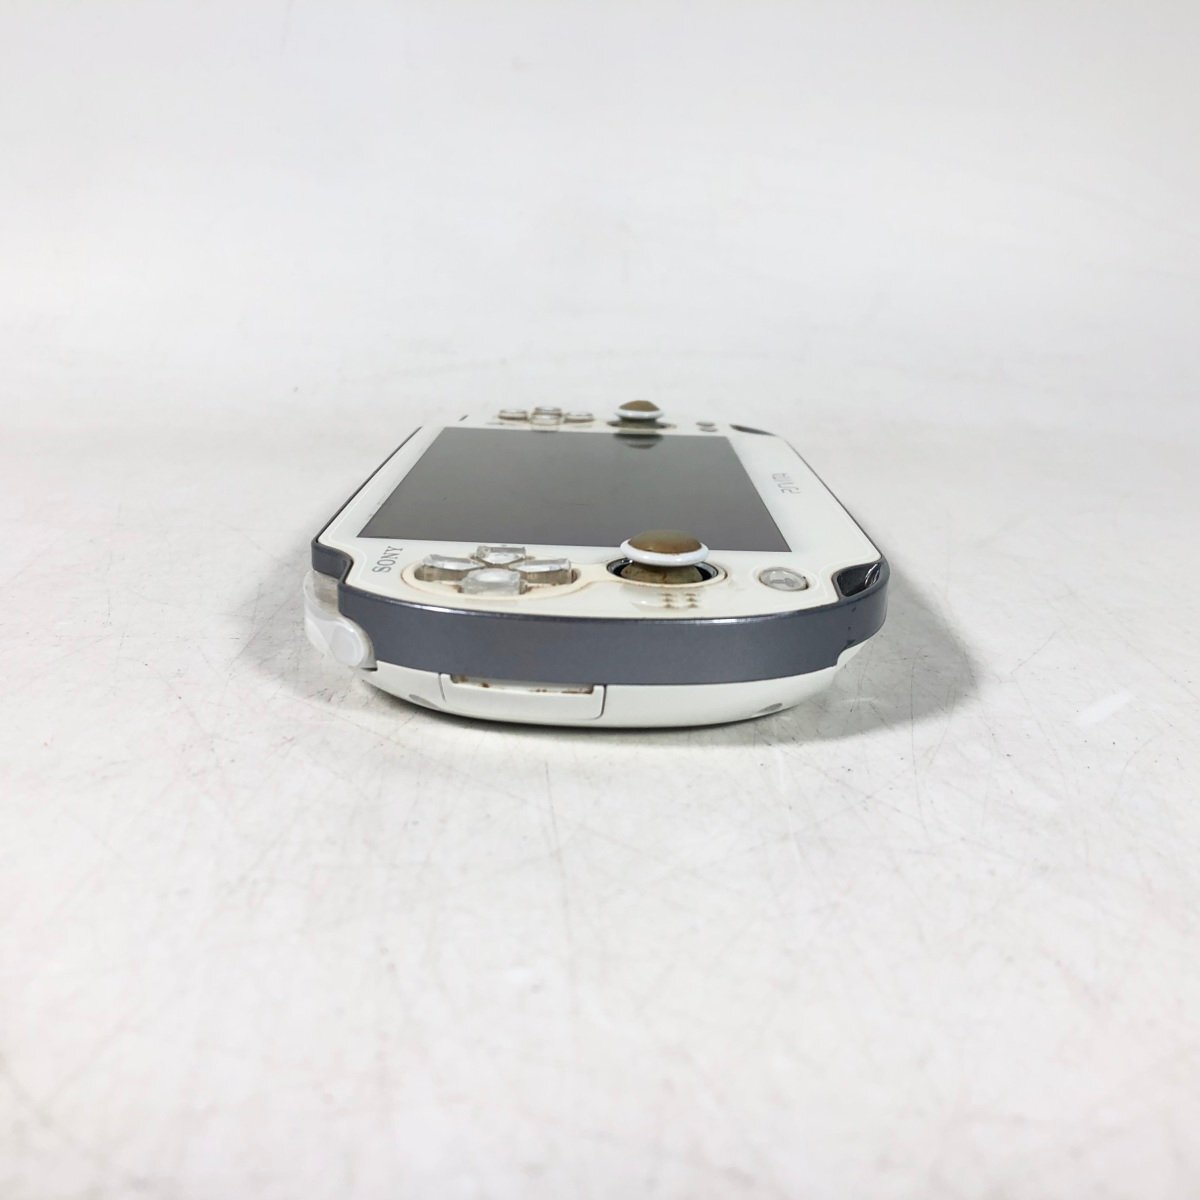  used with defect PSVita PCH-1100 white 